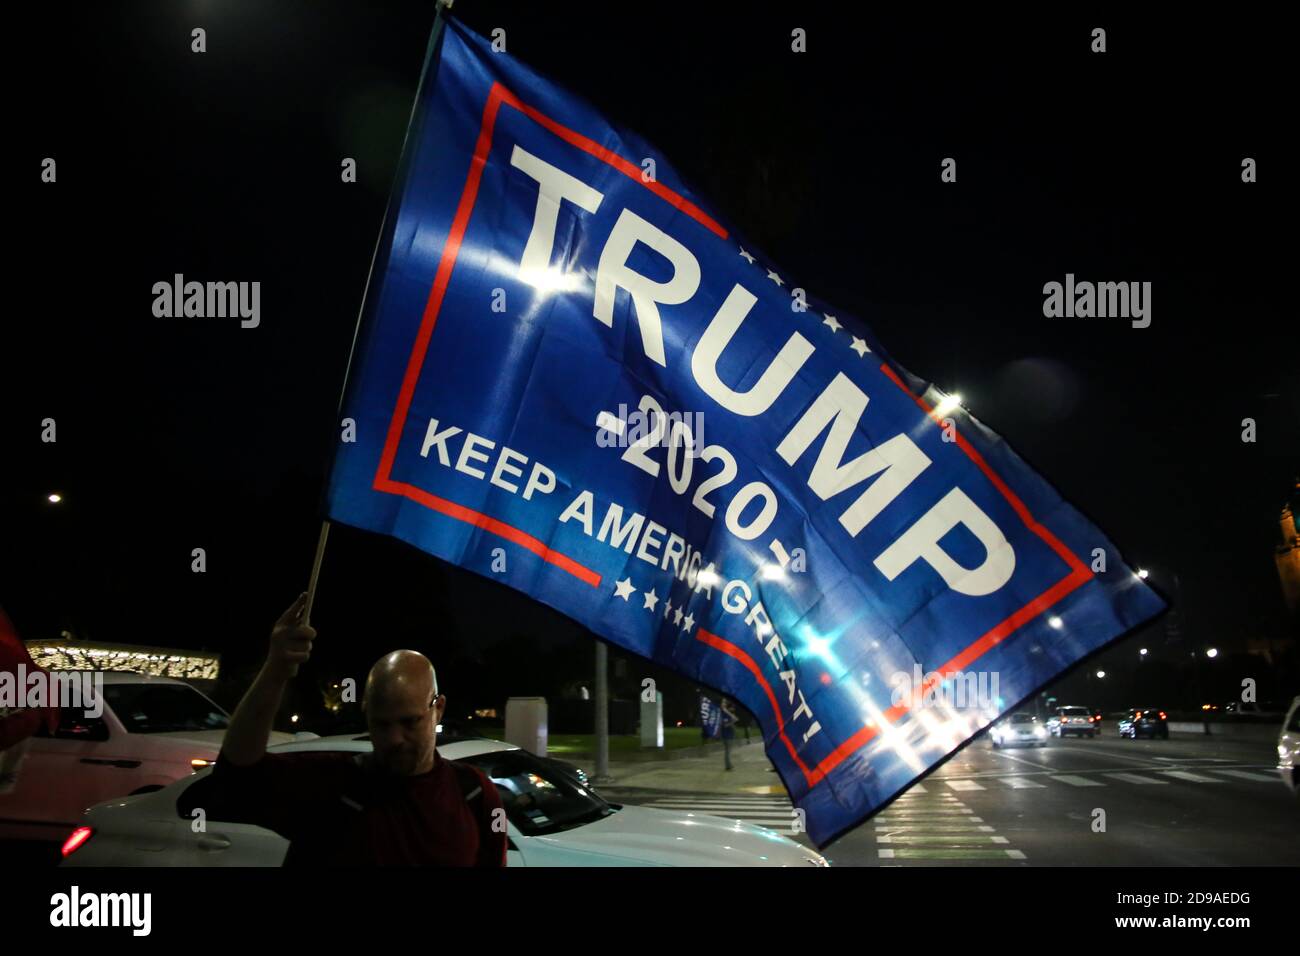 A Supporter Of President Trump Waves A Trump Flag That Reads Trump Keep America Great